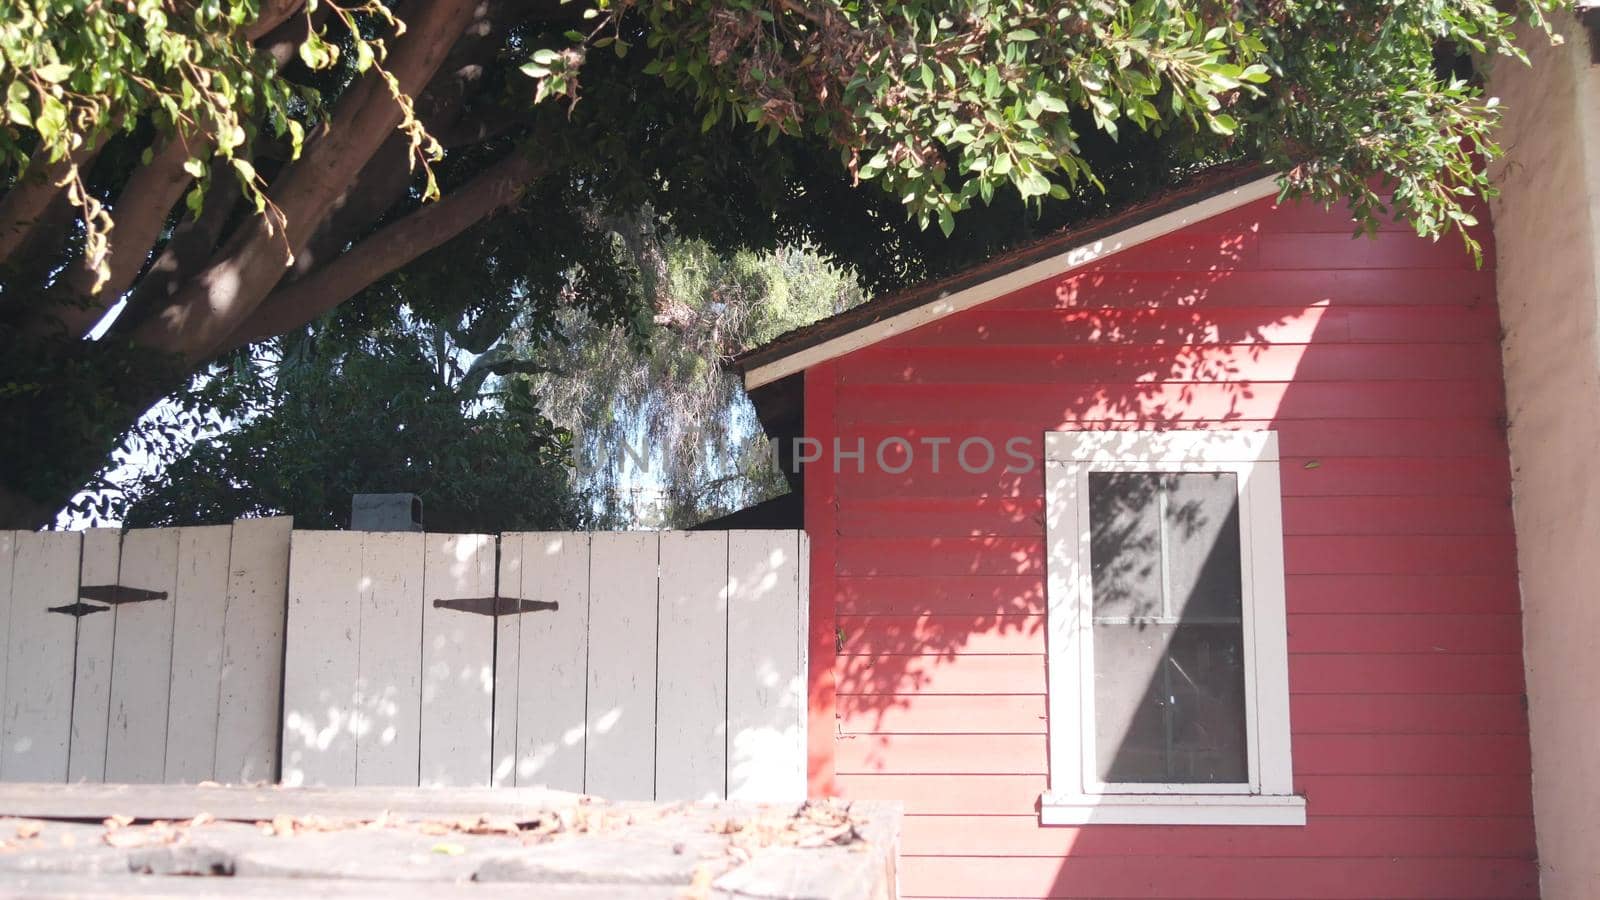 Red wooden rural ranch house, rustic building exterior, window and gate under tree, California, USA. Provincial homestead architecture, facade of retro farm in country village. Countryside dwelling.